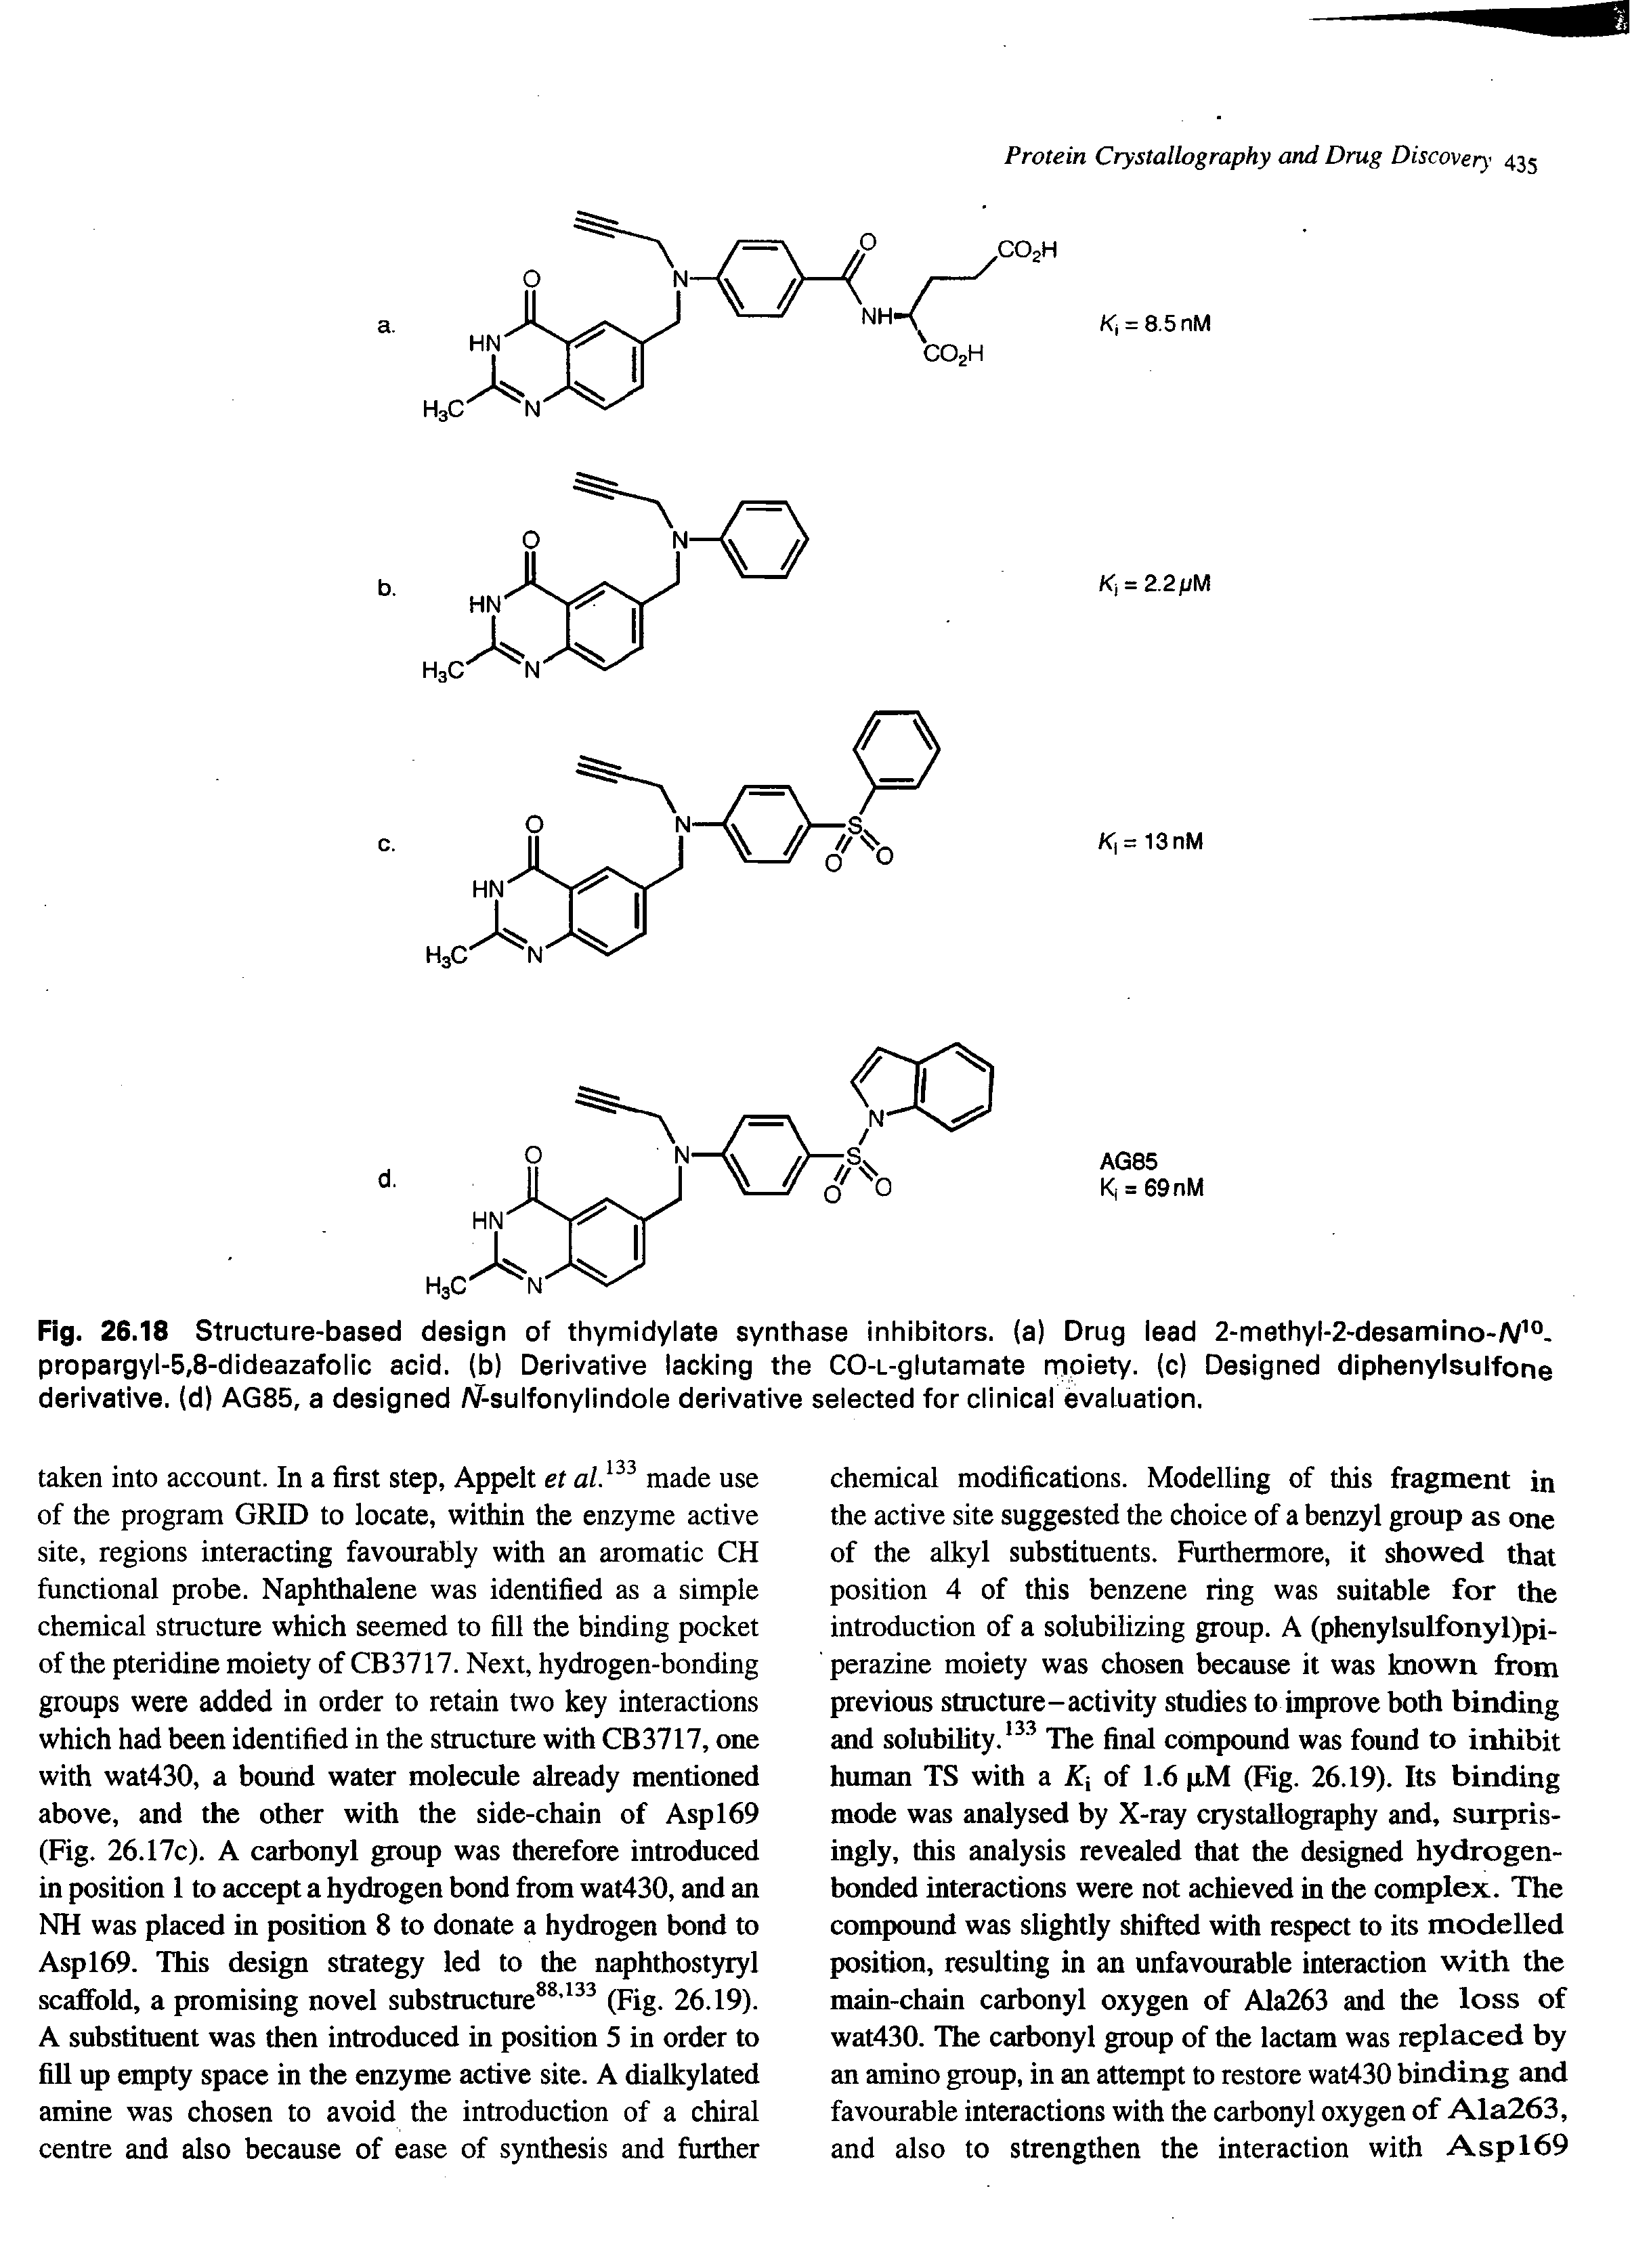 Fig. 26.18 Structure-based design of thymidylate synthase inhibitors, (a) Drug lead 2-methyl-2-desamino-/ / °-propargyl-5,8-dideazafolic acid, (b) Derivative lacking the CO-L-glutamate mpiety. (c) Designed diphenylsulfone derivative, (d) AG85, a designed A7-sulfonylindole derivative selected for clinical evaluation.